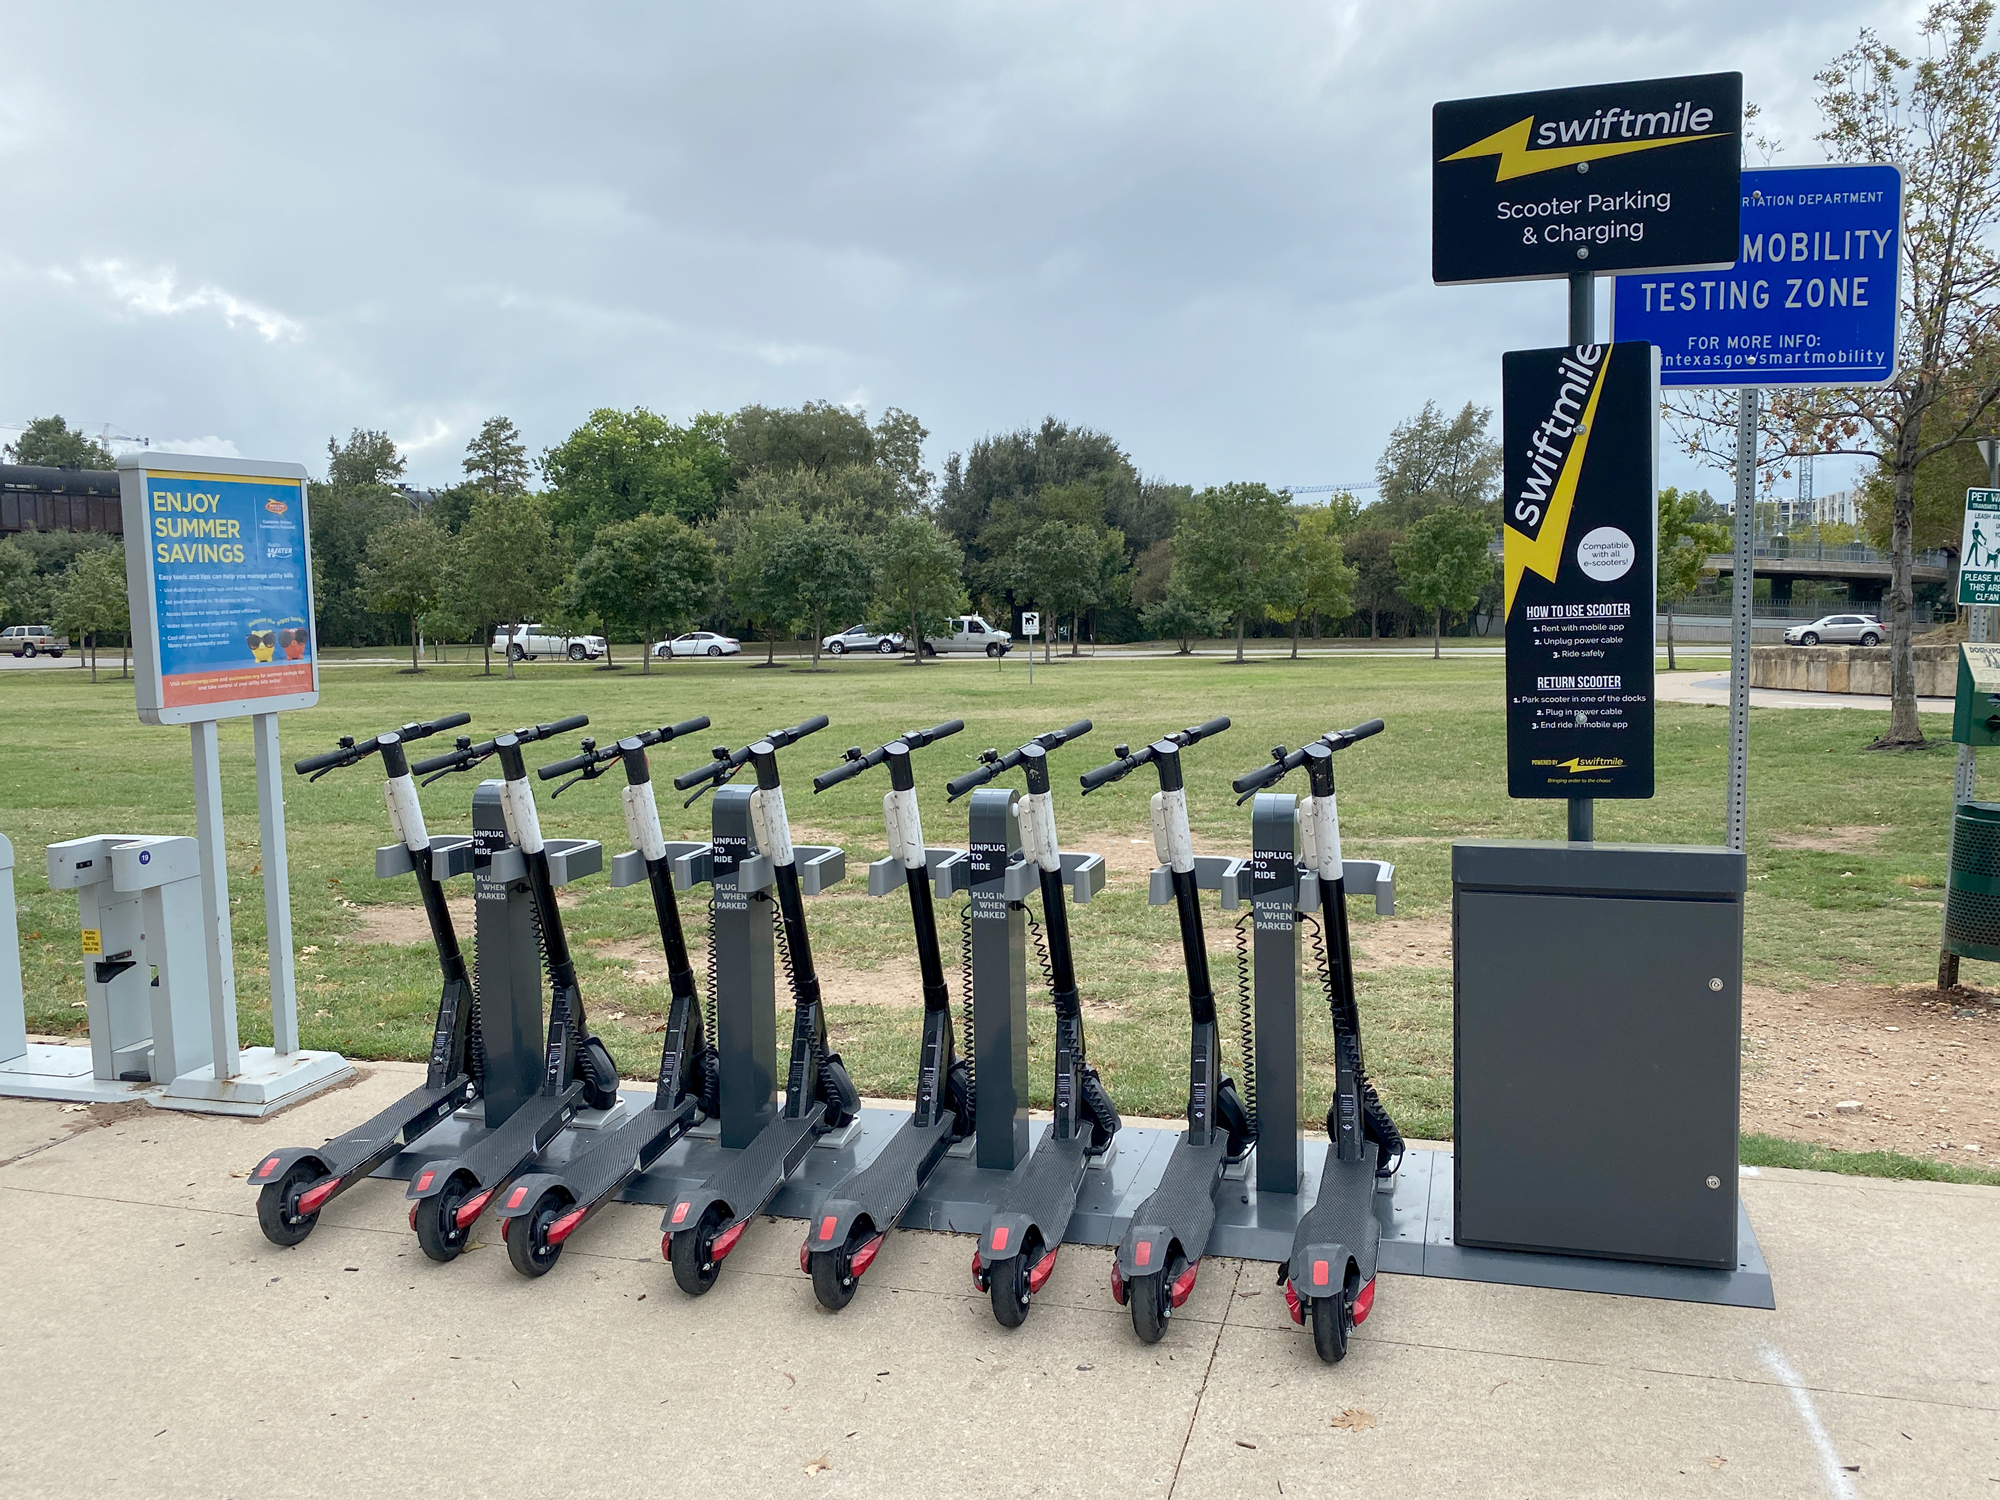 Swiftmile charging station with electric scooters